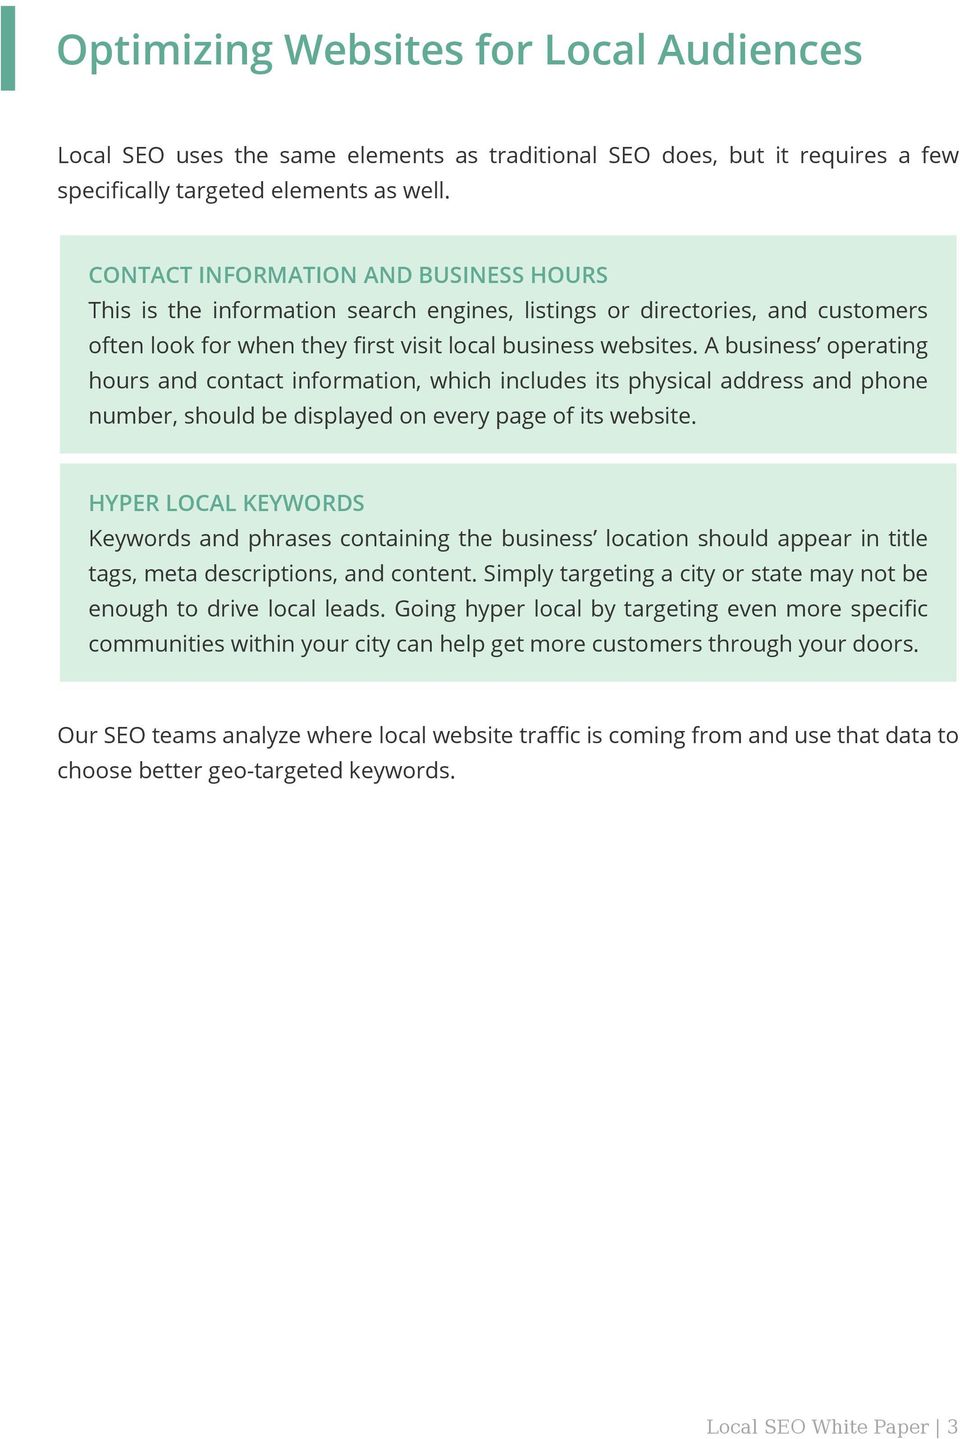 A business operating hours and contact information, which includes its physical address and phone number, should be displayed on every page of its website.